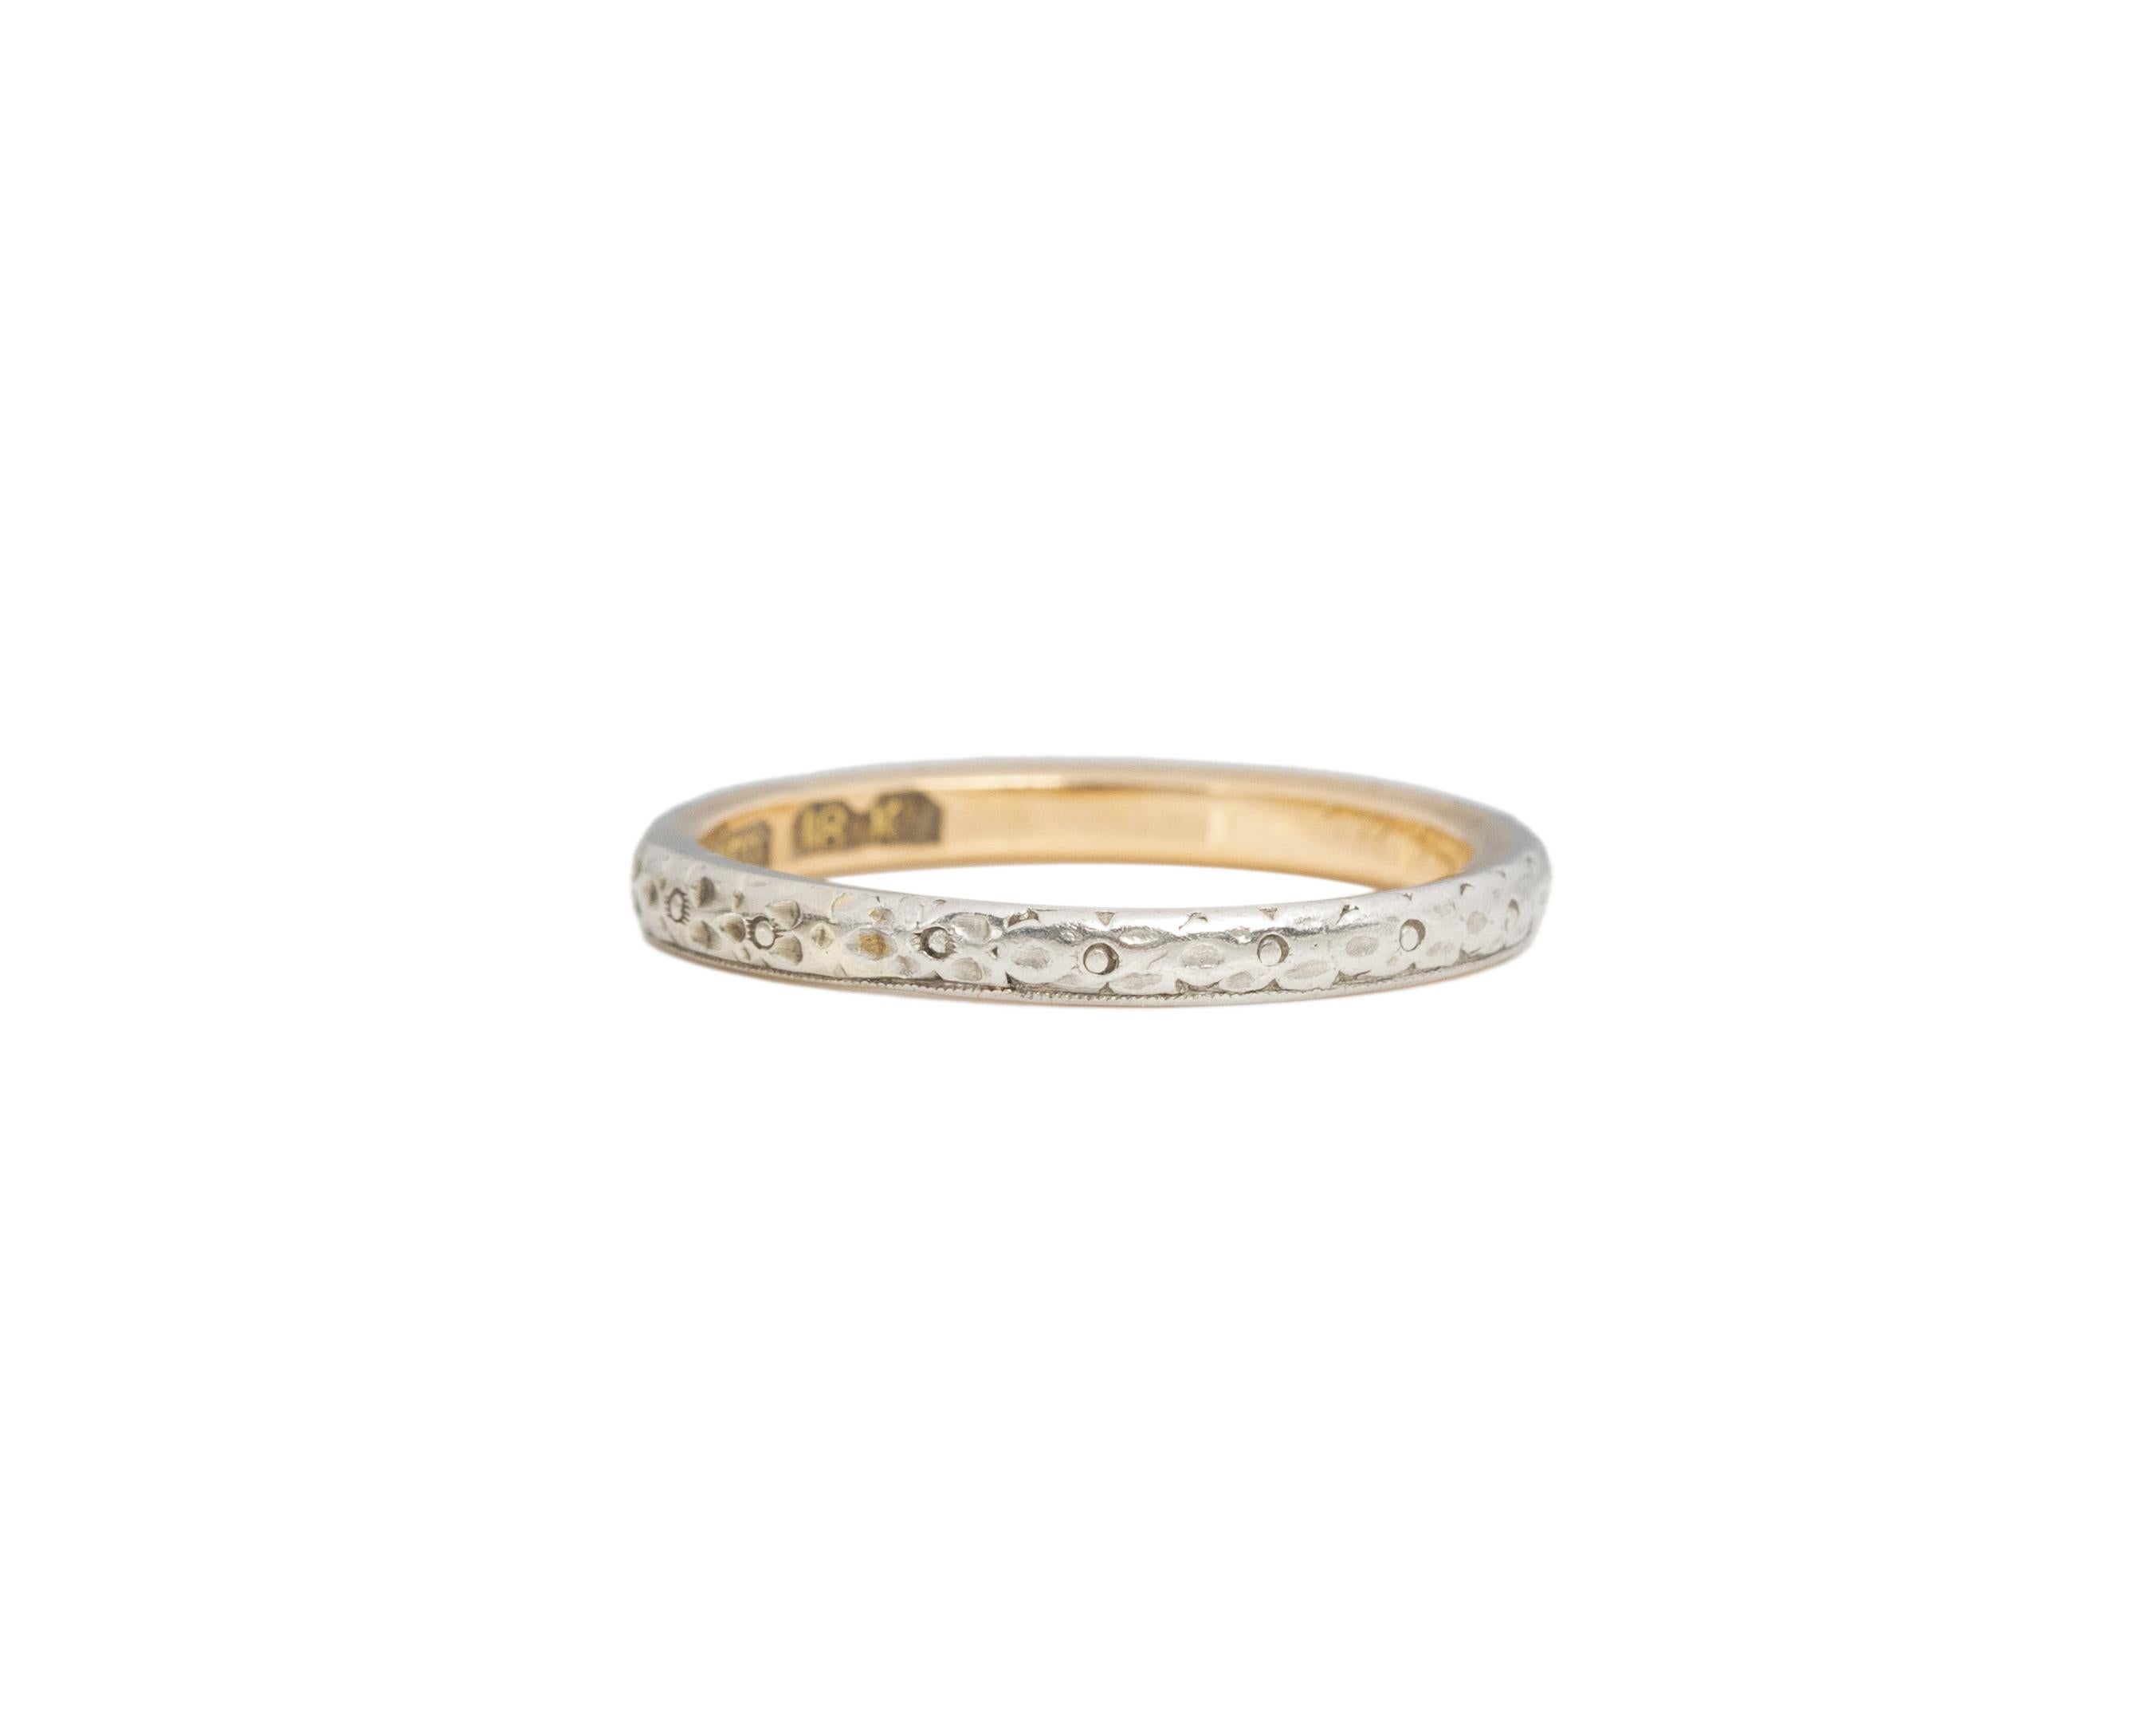 Ring Size: 8.5
Metal Type: 18K Yellow Gold and Platinum [Hallmarked, and Tested]
Weight: 3.9grams

Shank/Band Width: 2.5mm
Condition: Excellent